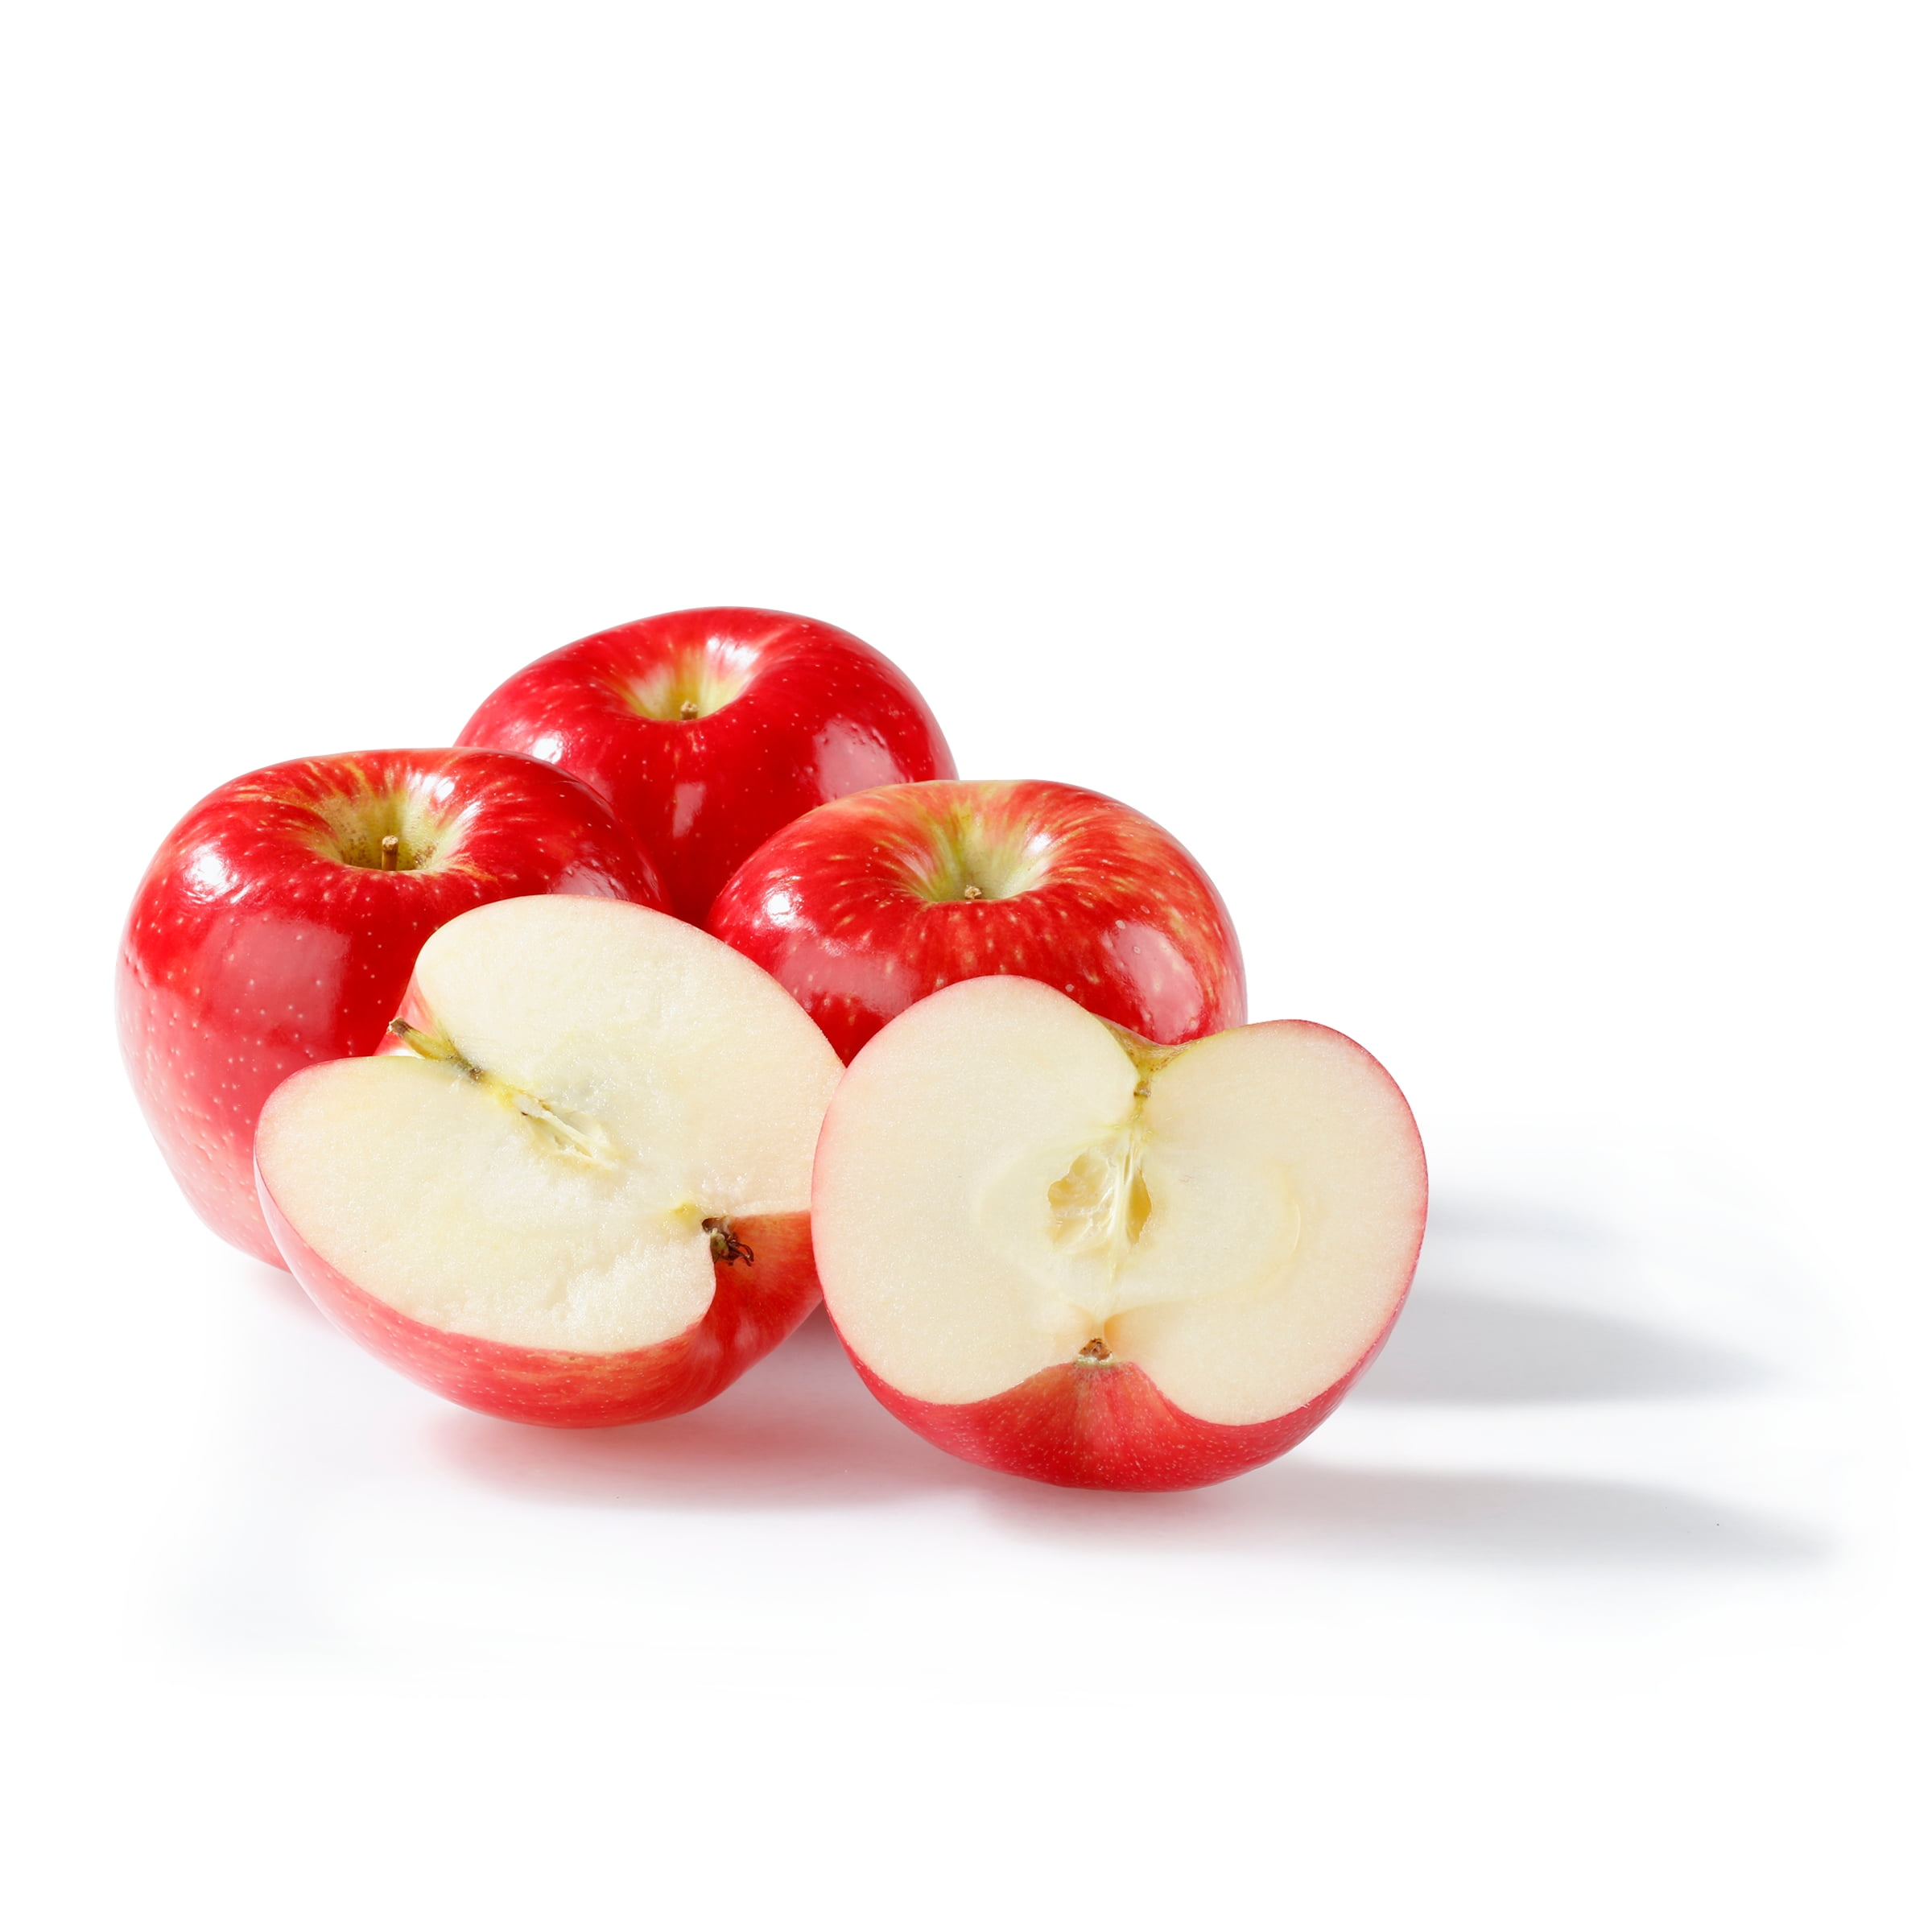 Calories in 1 medium Honeycrisp Apples and Nutrition Facts